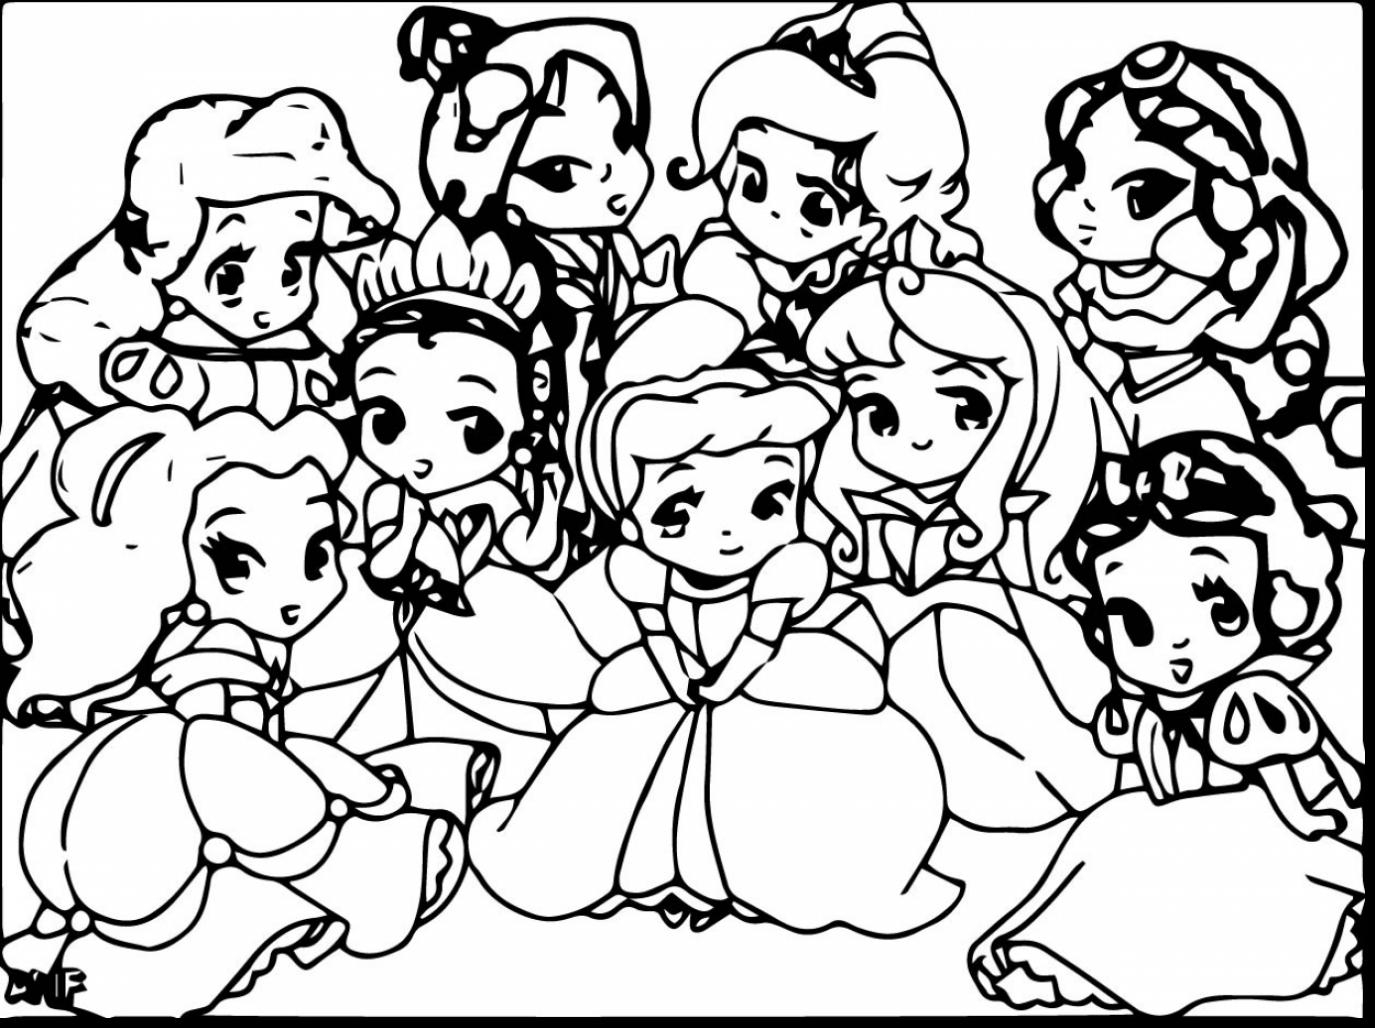 Baby Disney Princesses Coloring Pages at GetColorings.com | Free ...